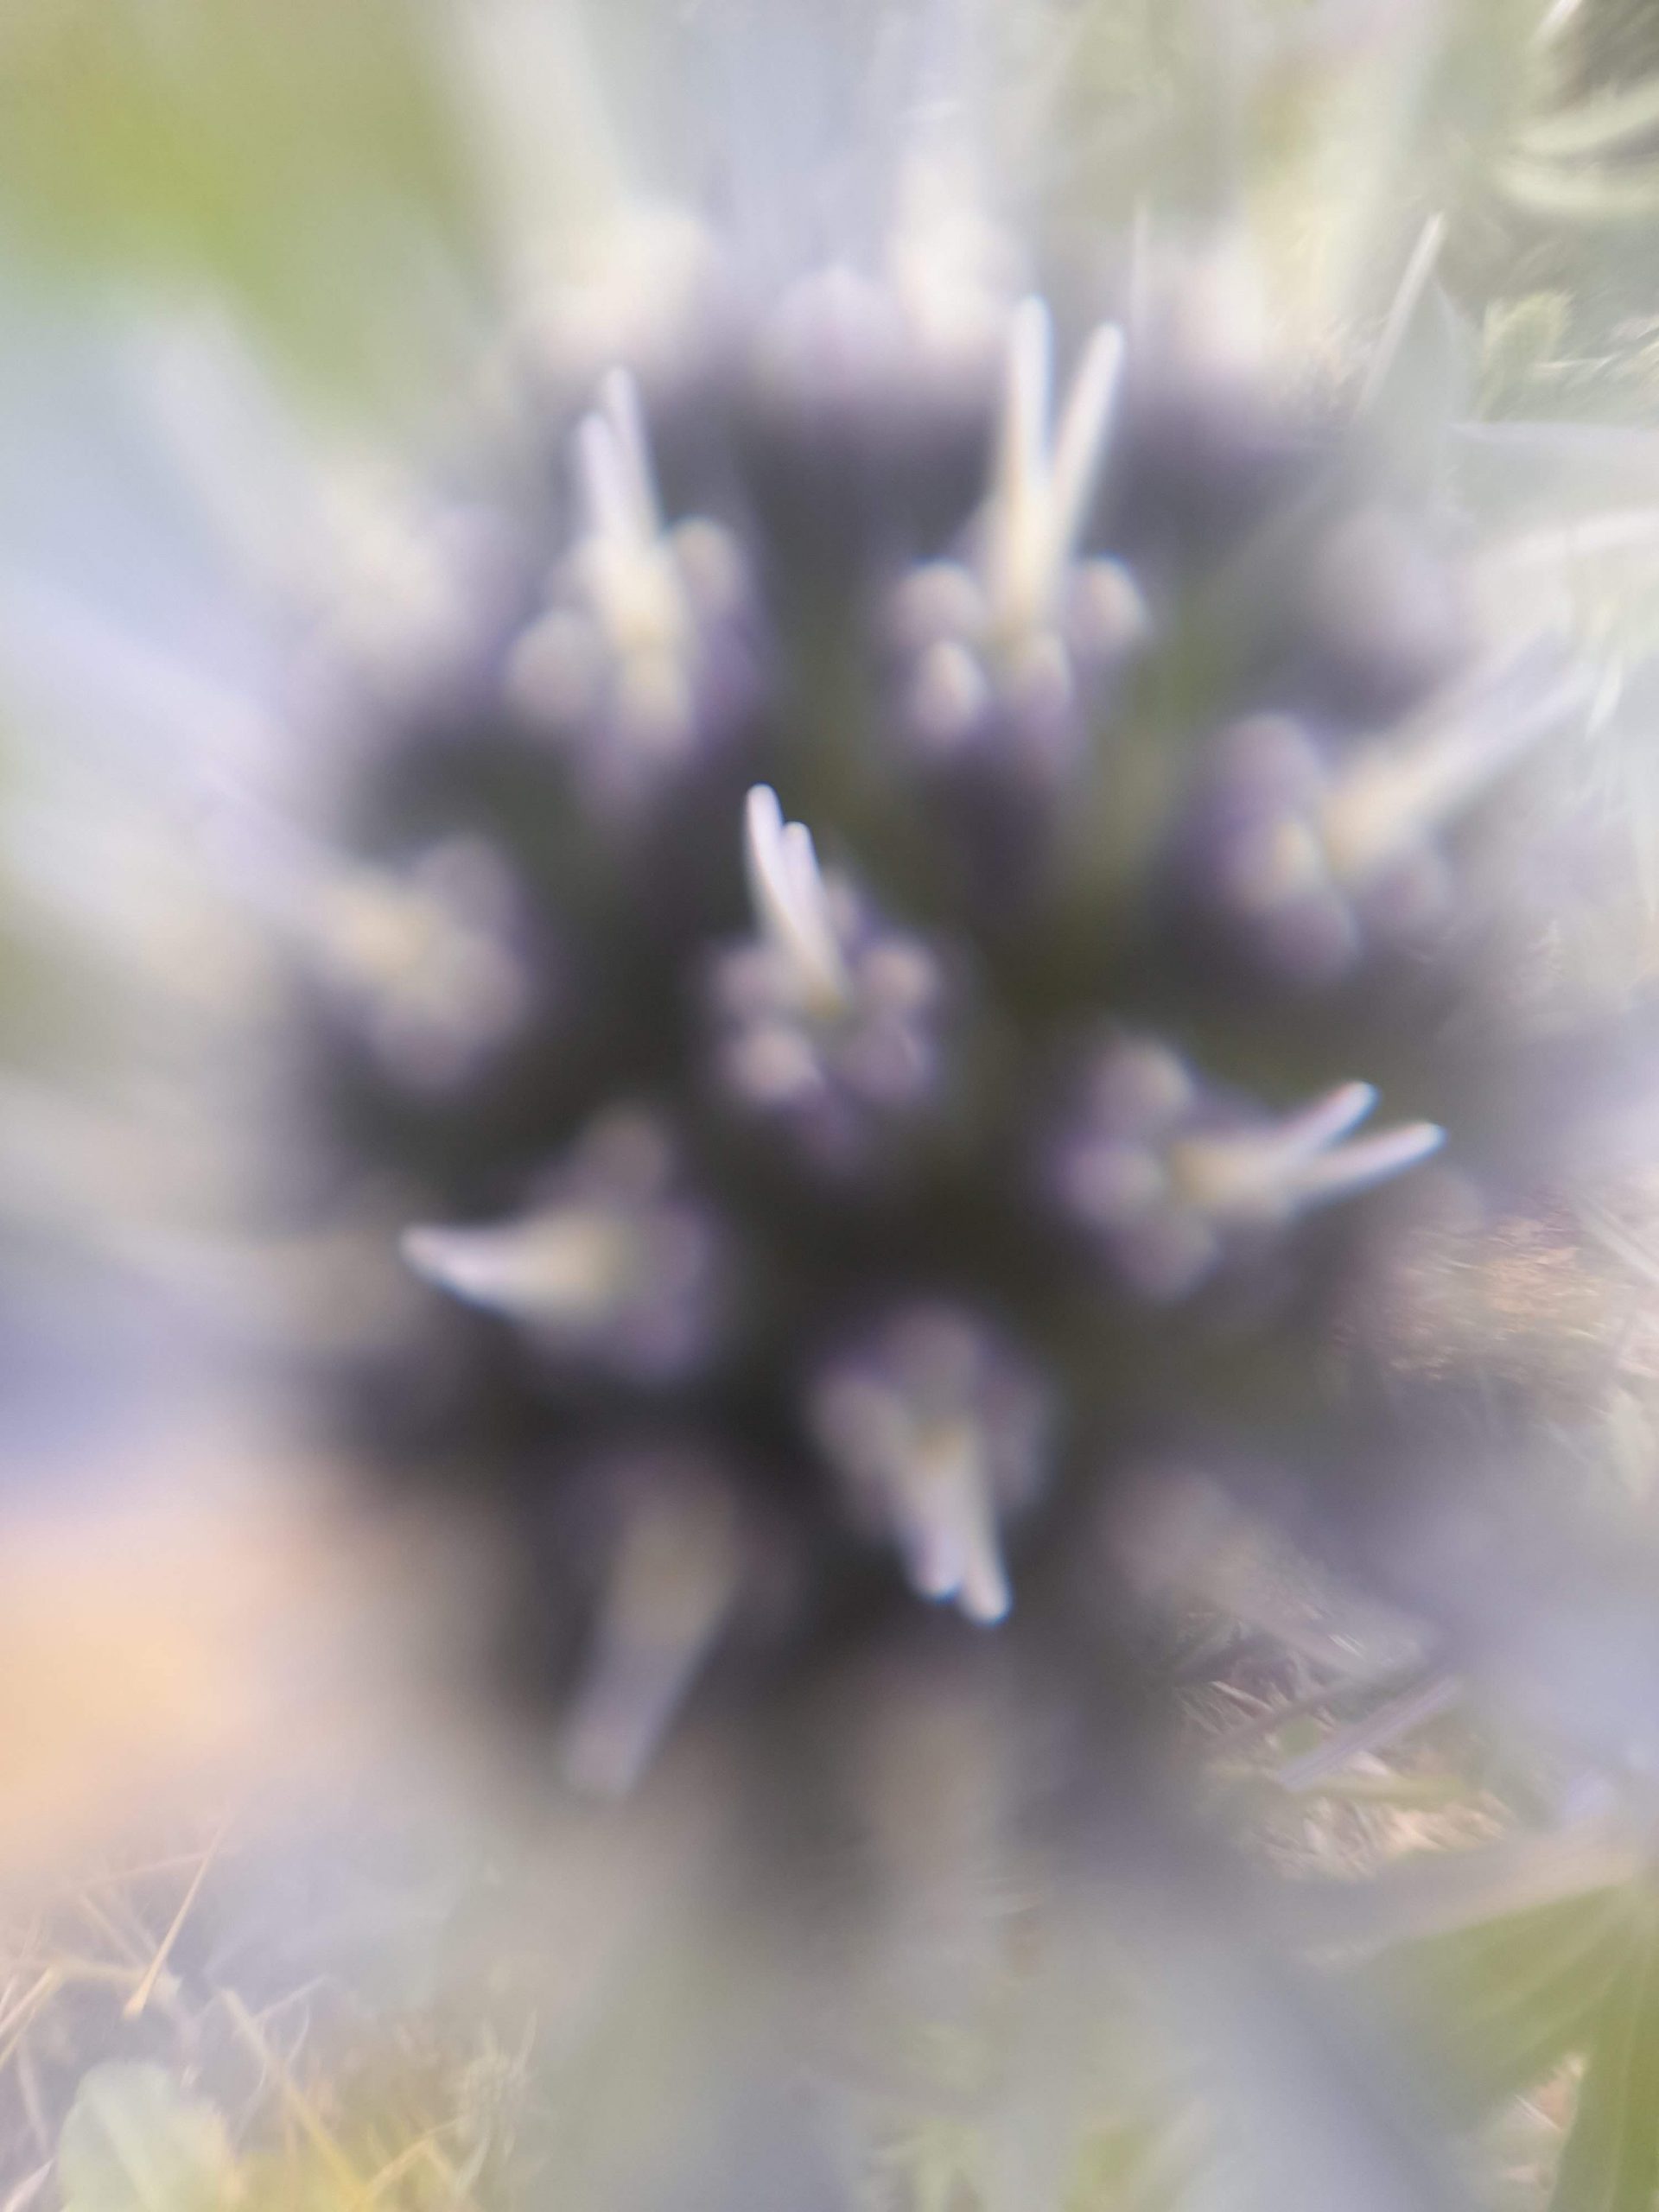 Looks like COVID but it's sea holly